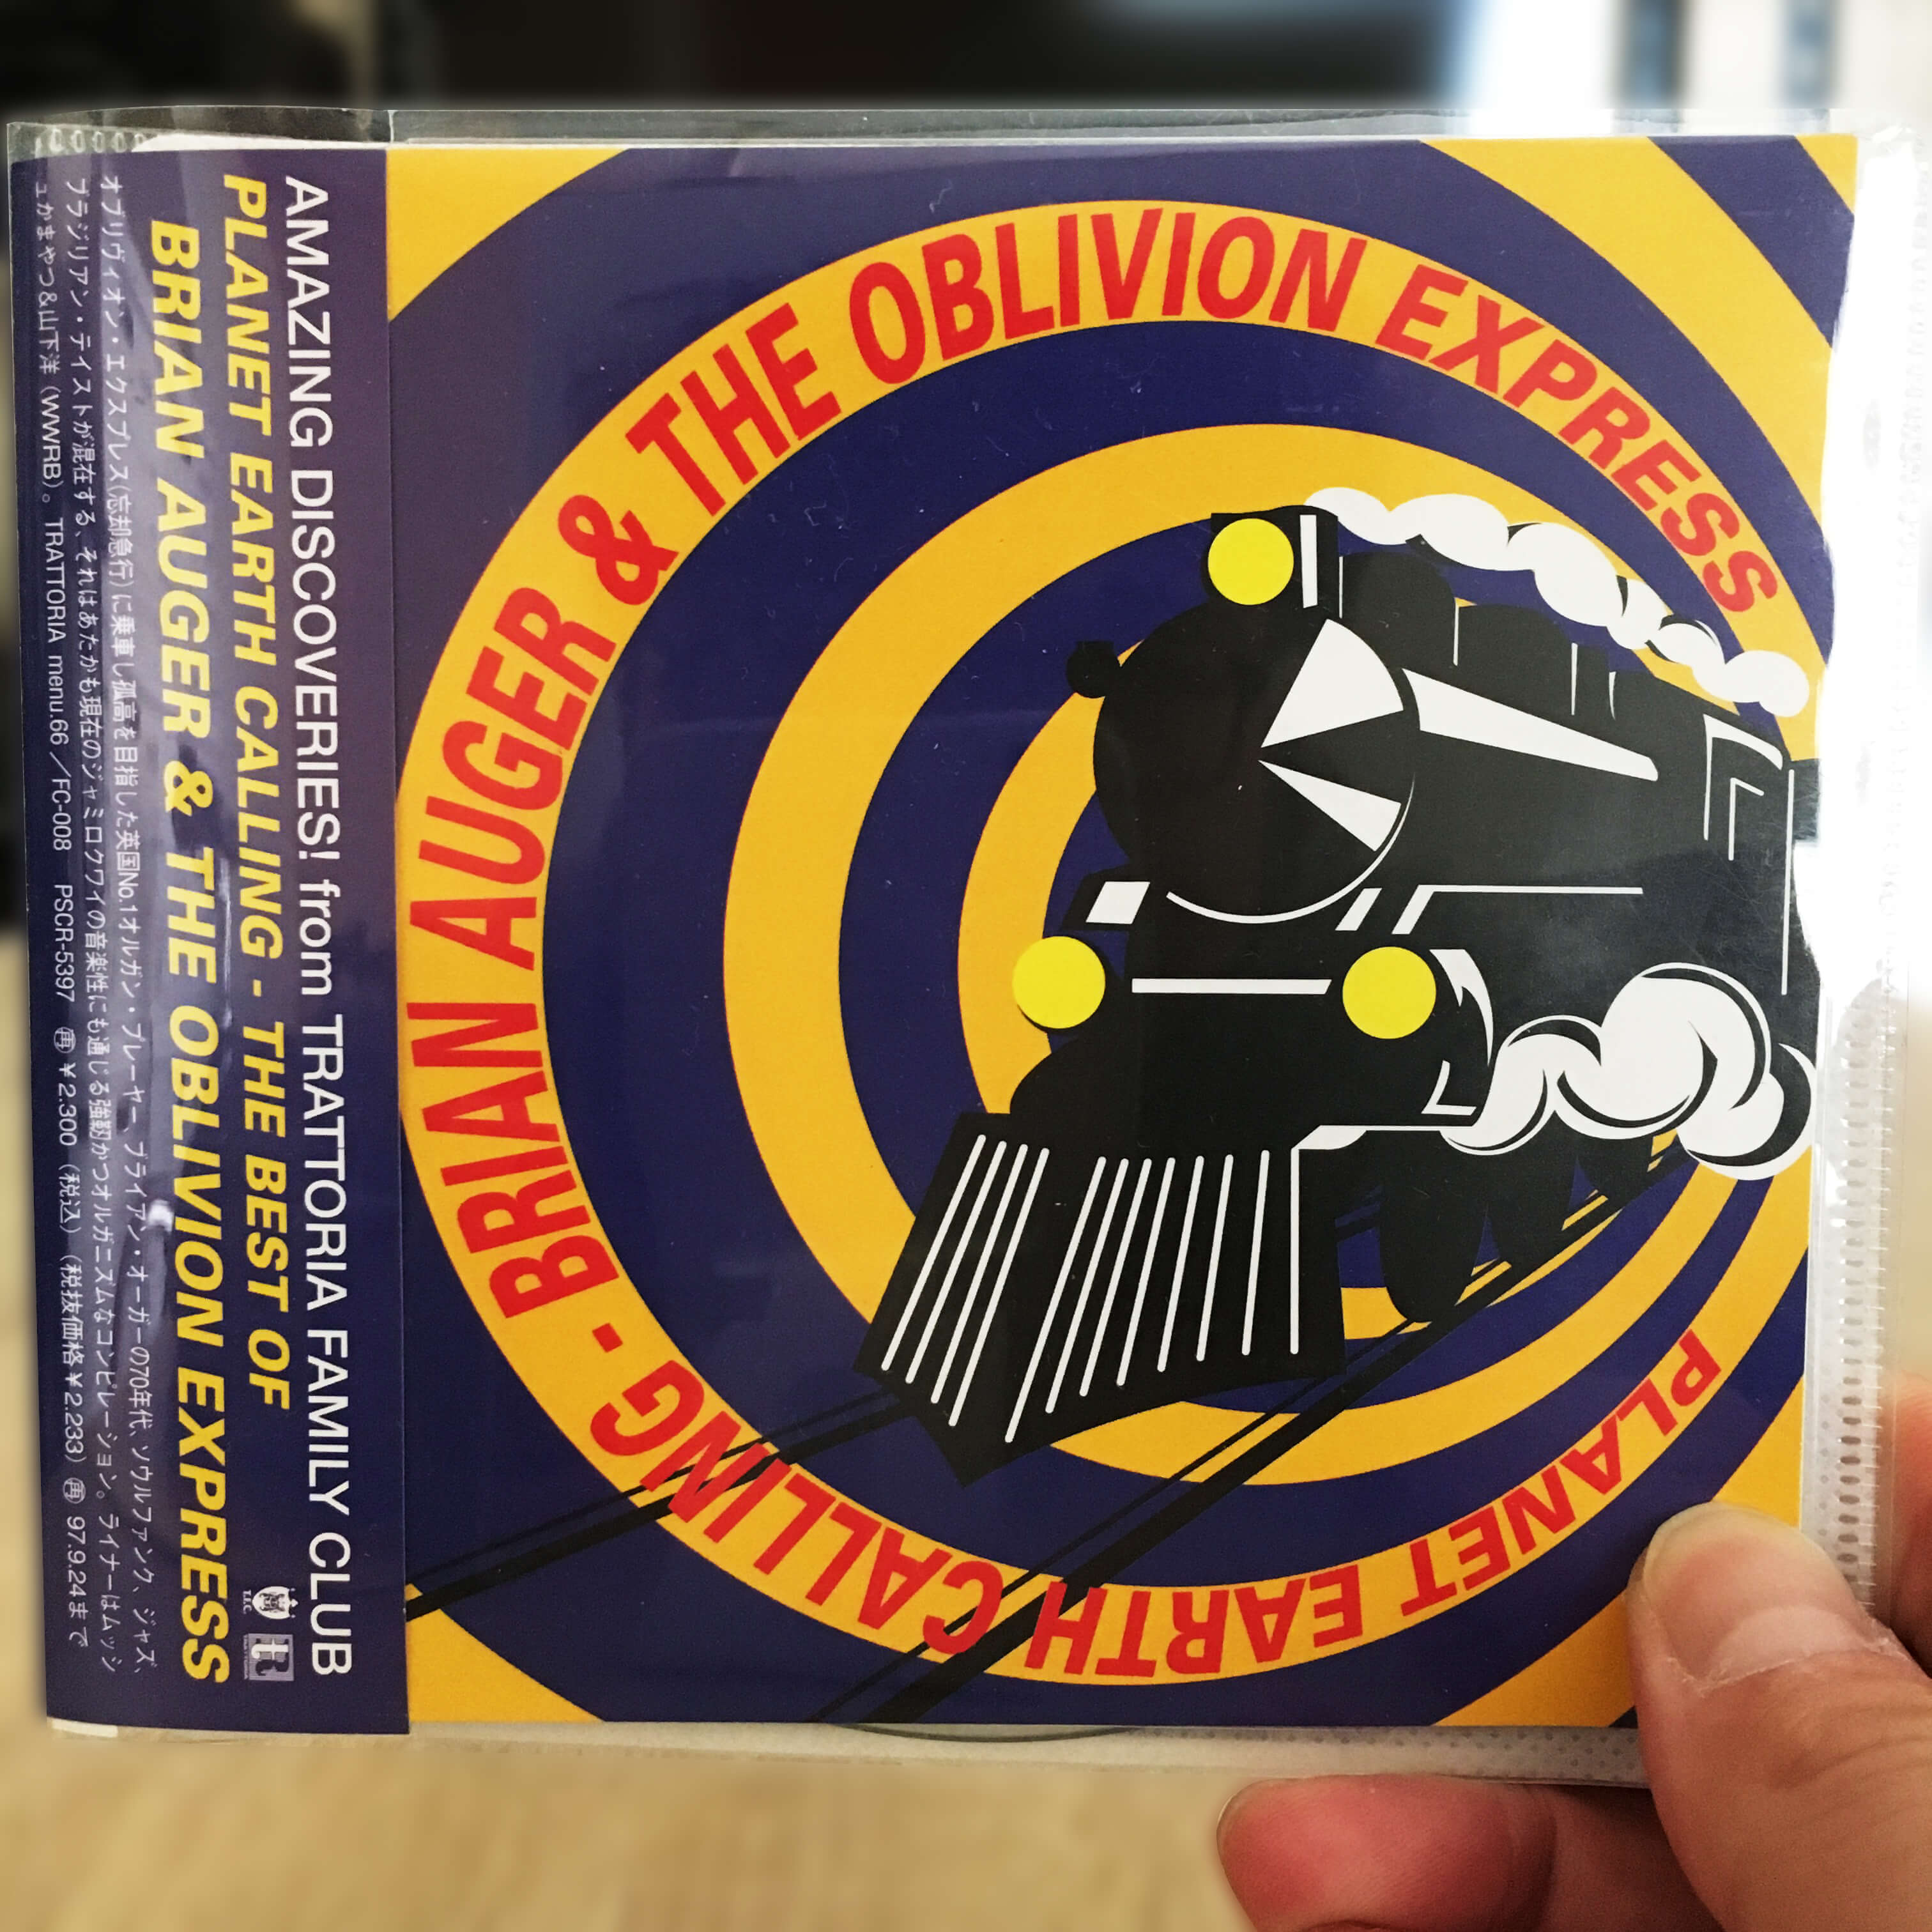 PLANET EARTH CALLING – THE BEST OF BRIAN AUGER & THE OBLIVION EXPRESS